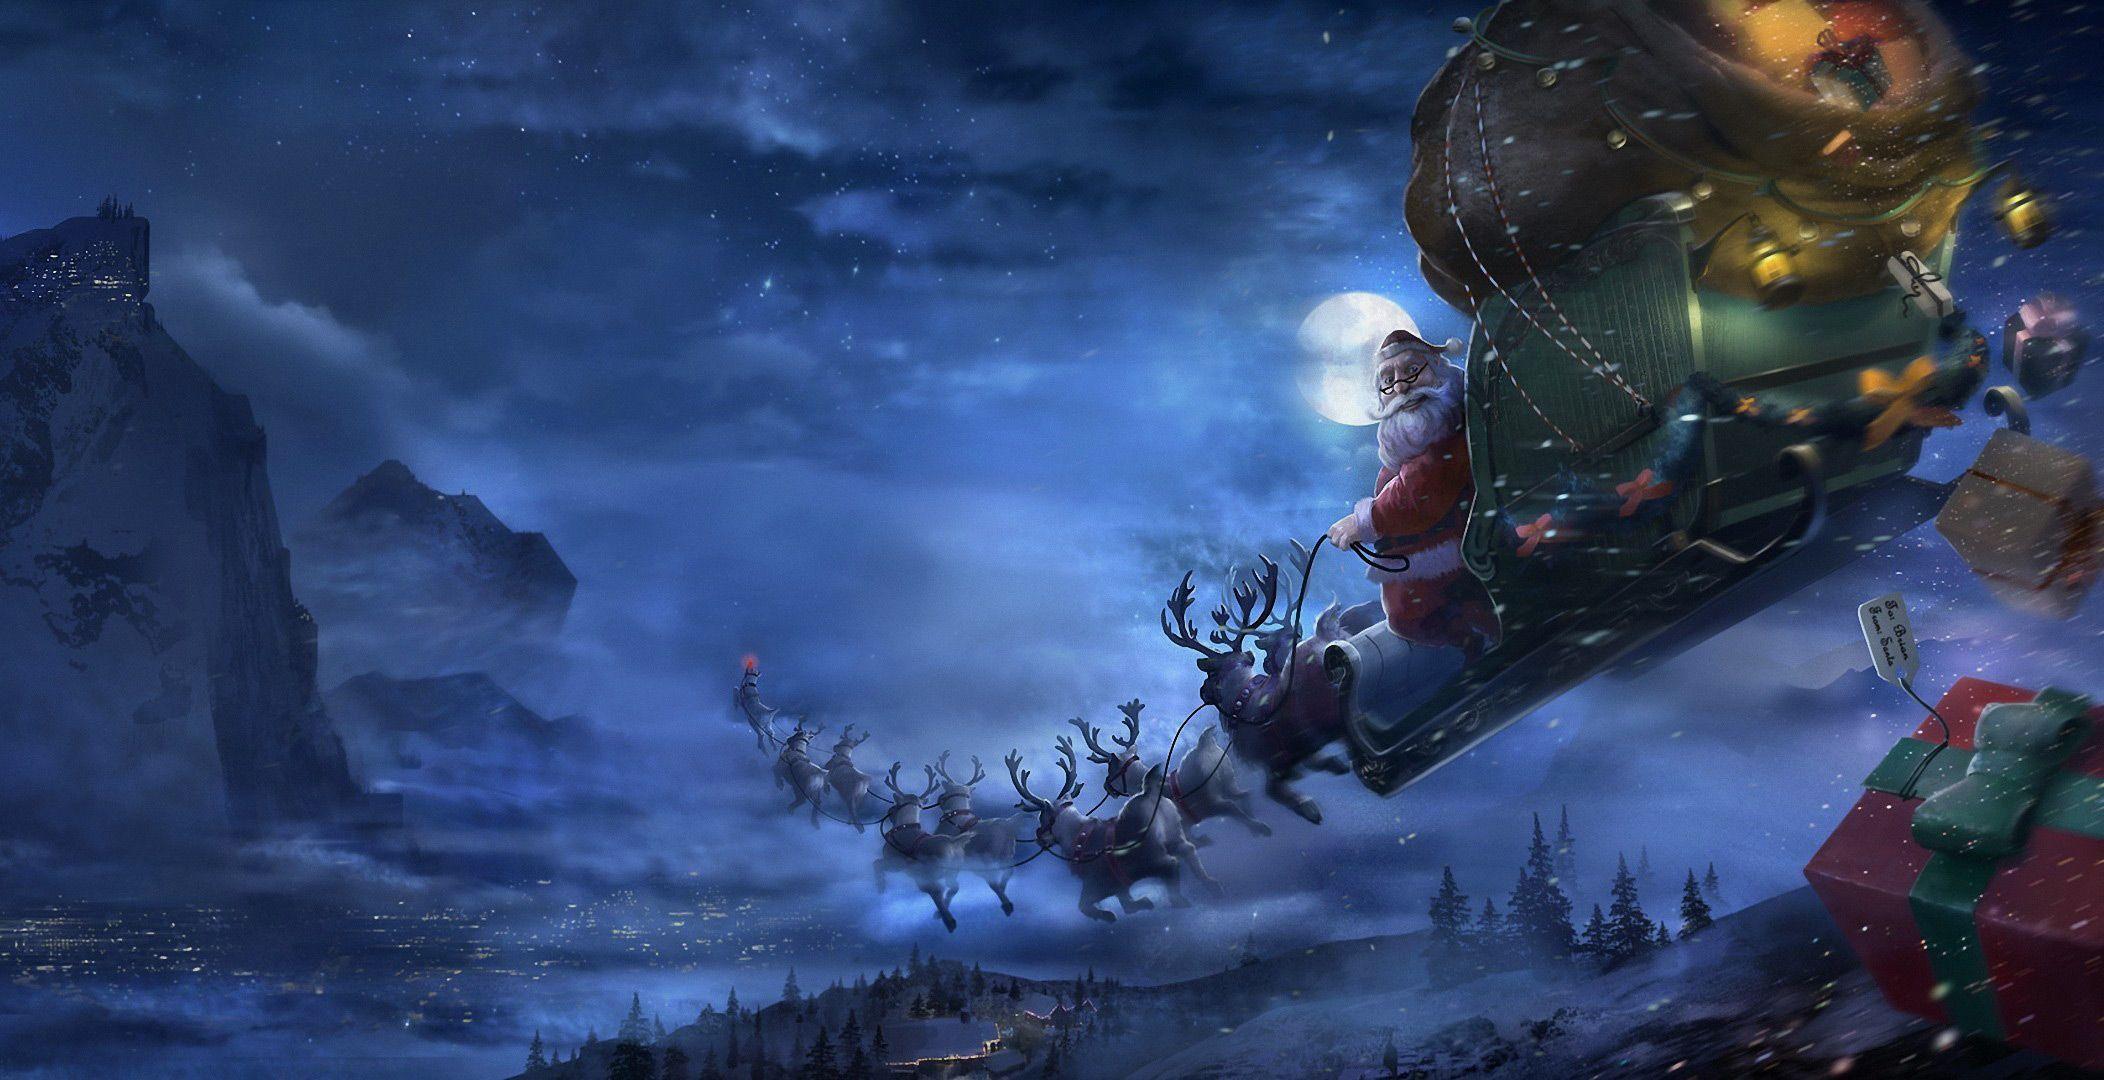 Santa with Sleigh and Reindeers in the Sky Christmas Background